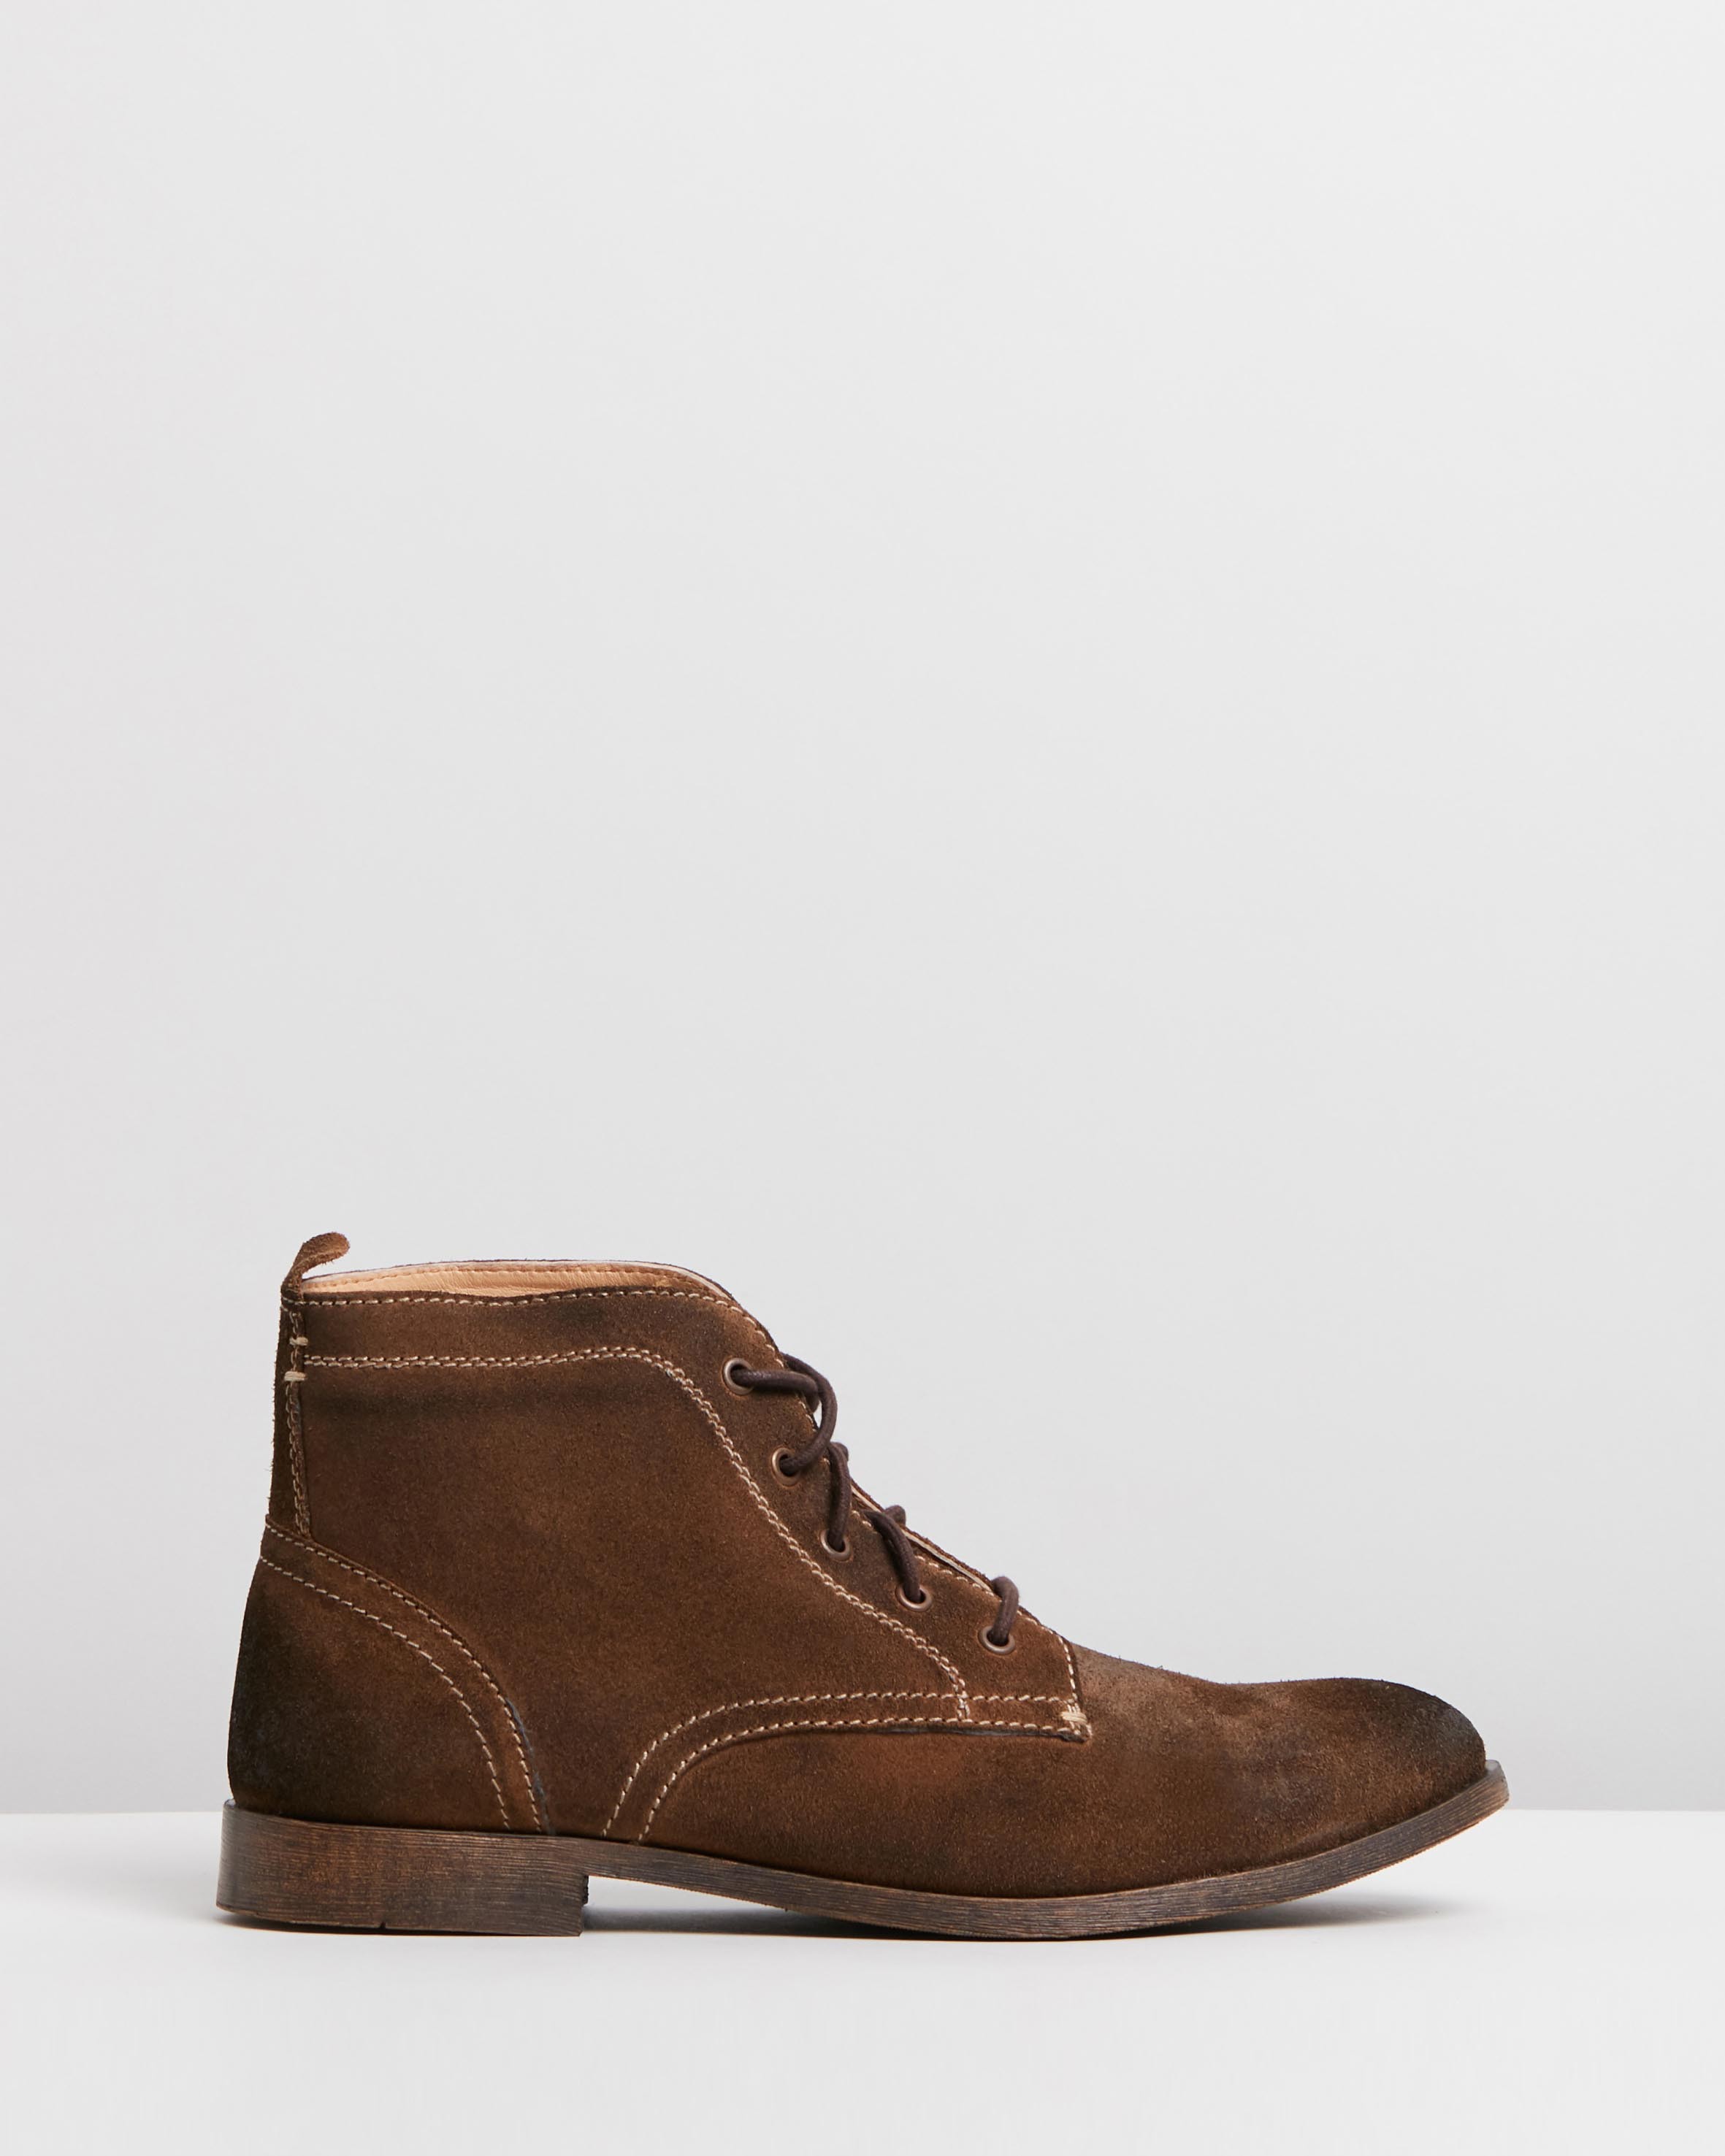 Beaumont Suede Boots Taupe Oily by Staple Superior | ShoeSales